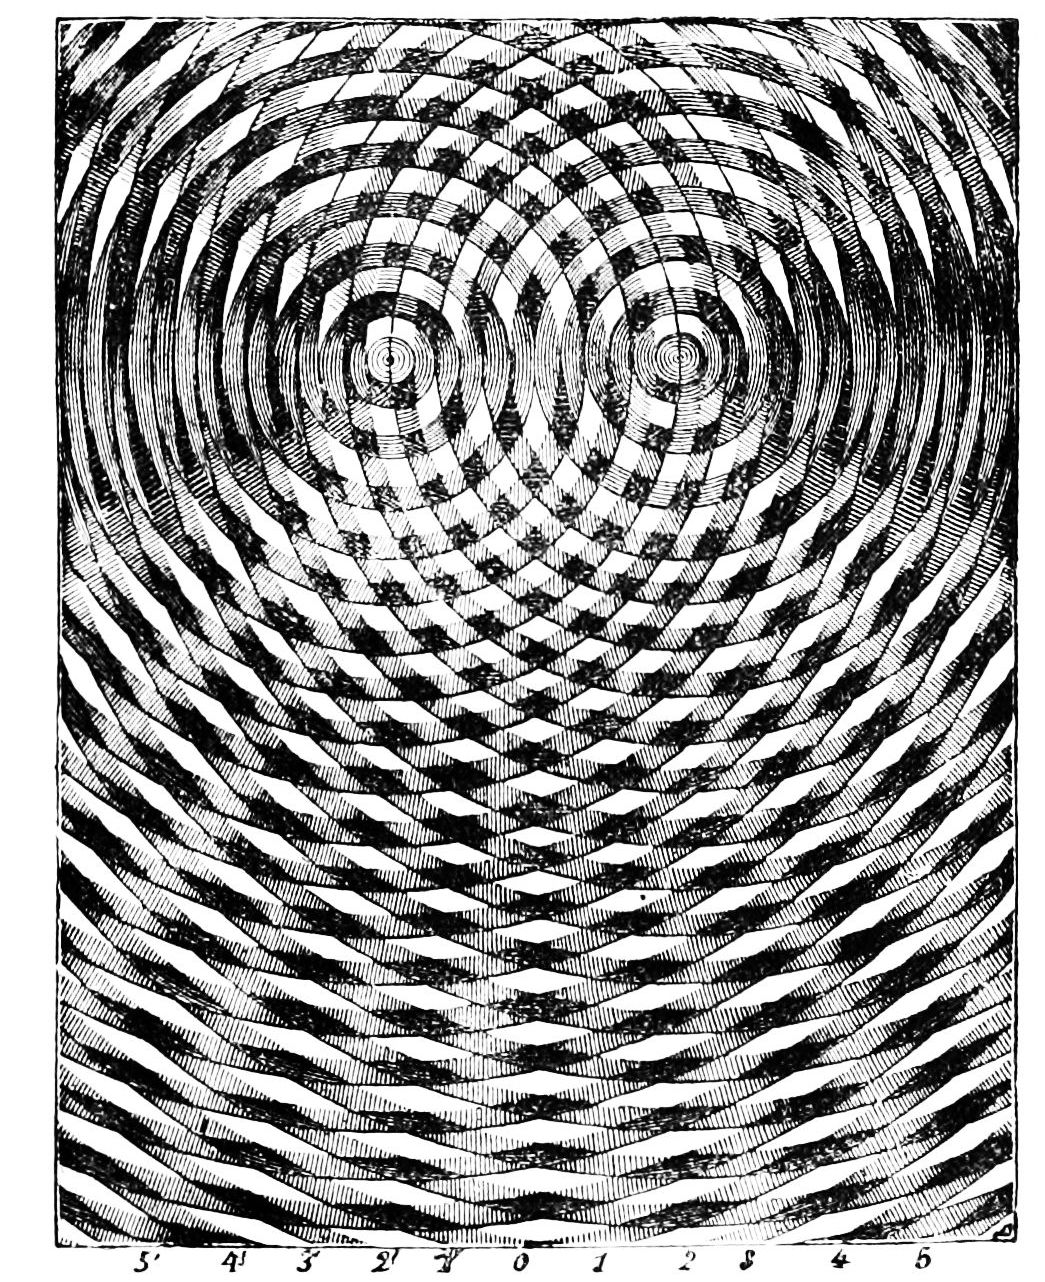 Nom : Hyperbolas_produced_by_interference_of_waves.jpg
Affichages : 207
Taille : 485,9 Ko